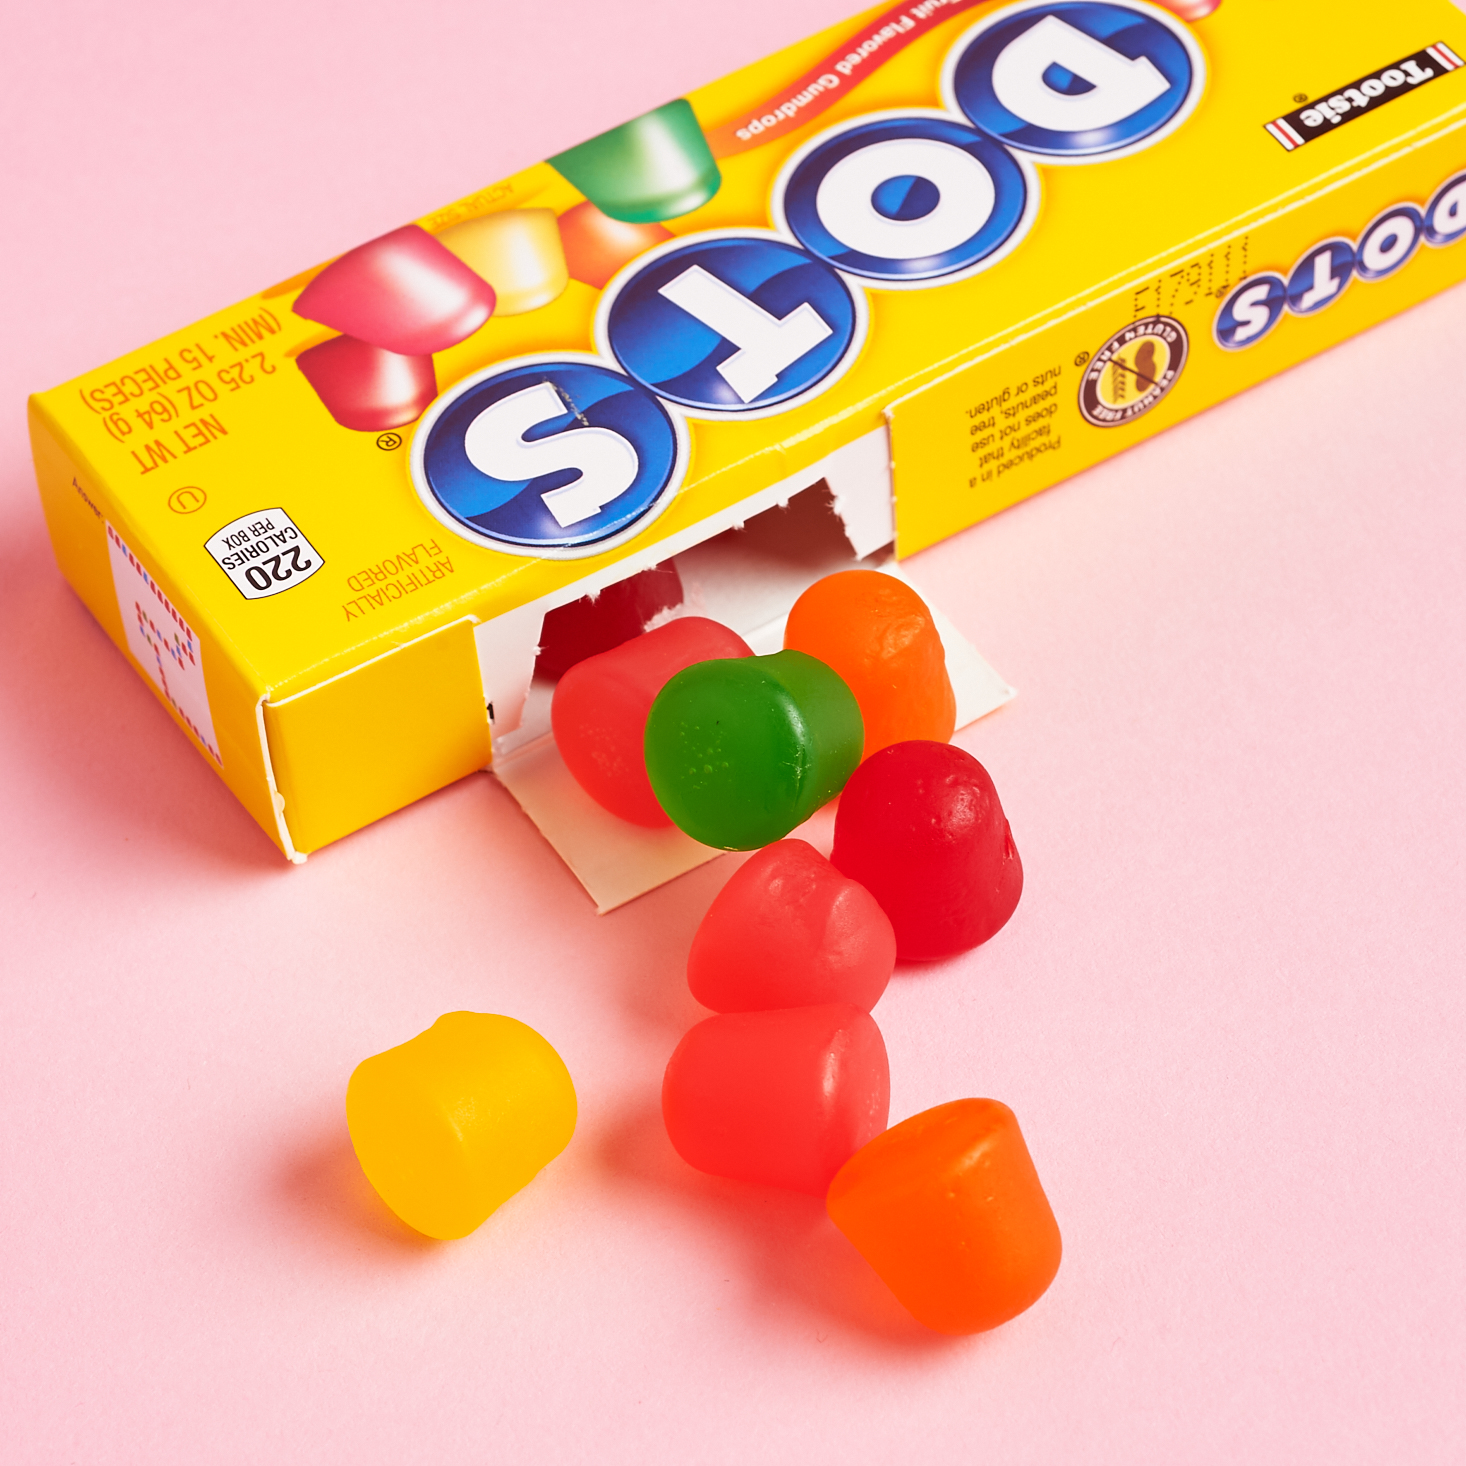 Box of Dots candy spilling out